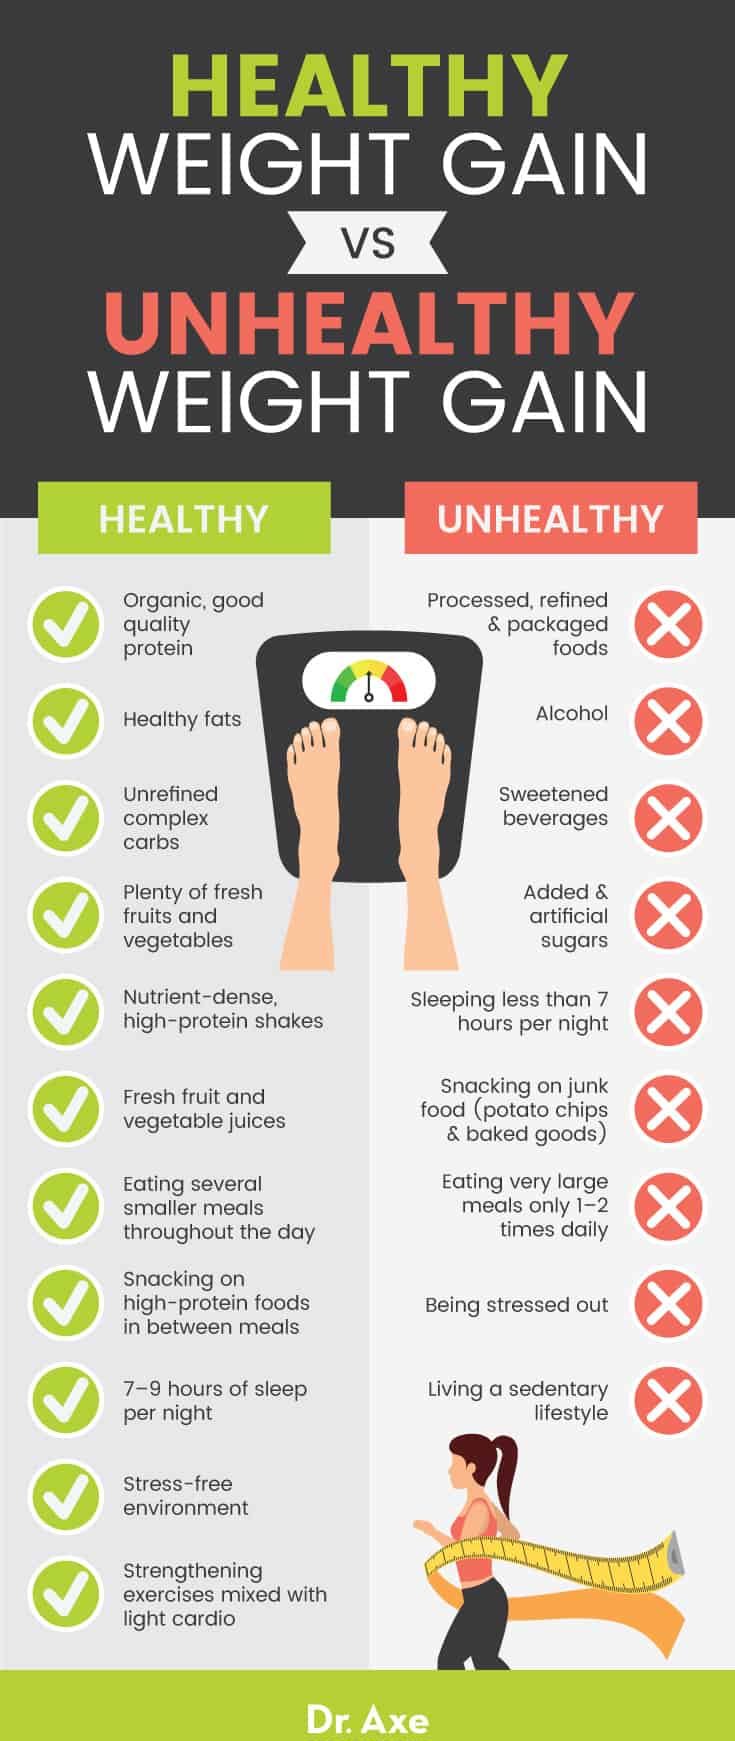 Healthy weight gain vs. unhealthy weight gain - Dr. Axe